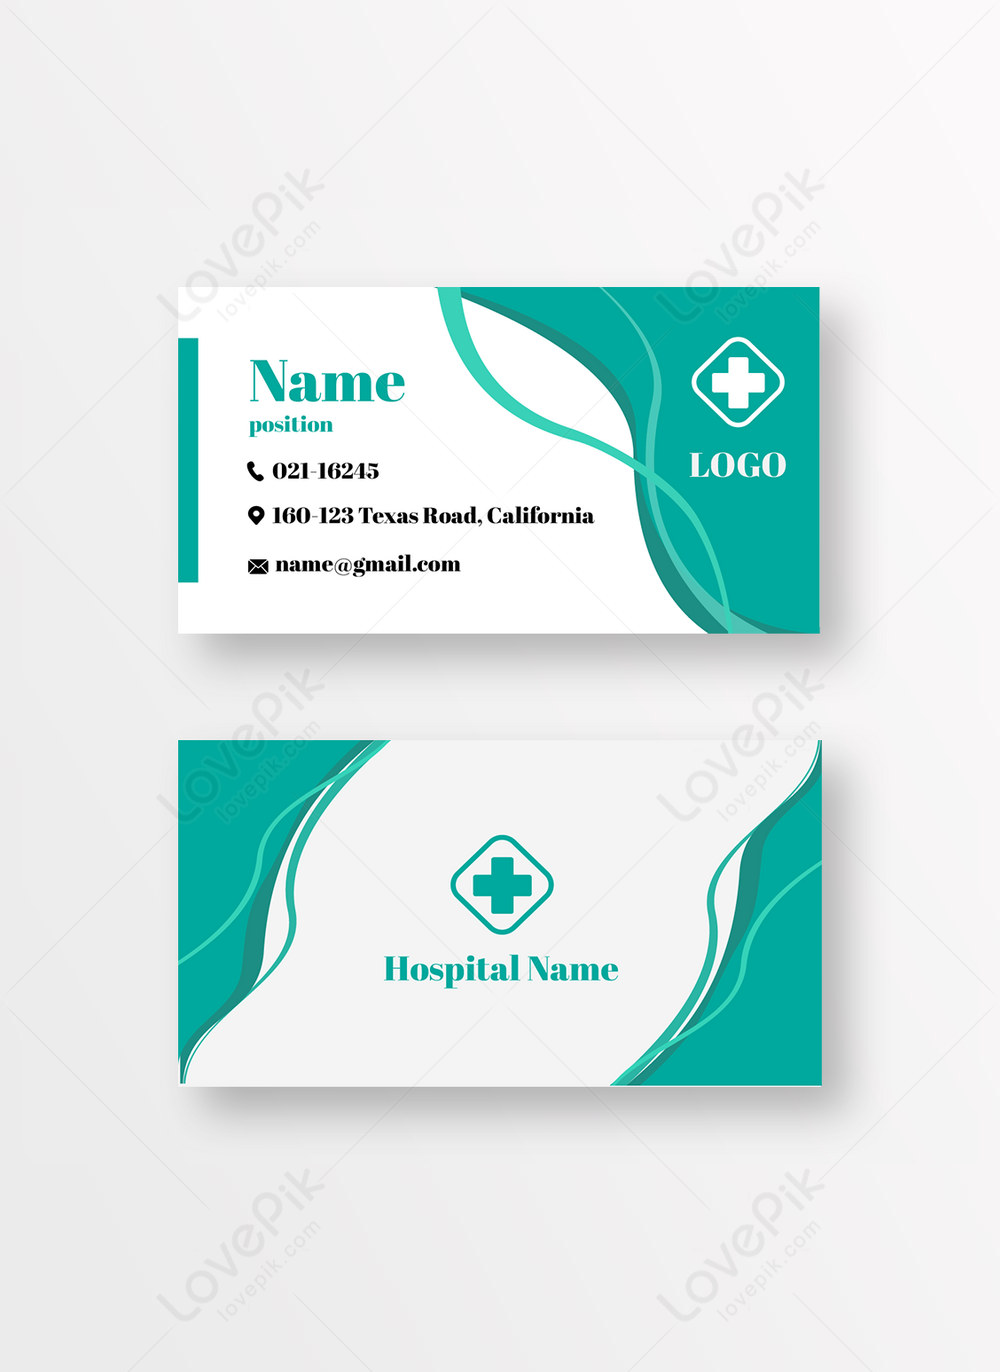 Medical hospital theme business card design template image_picture With Regard To Medical Business Cards Templates Free